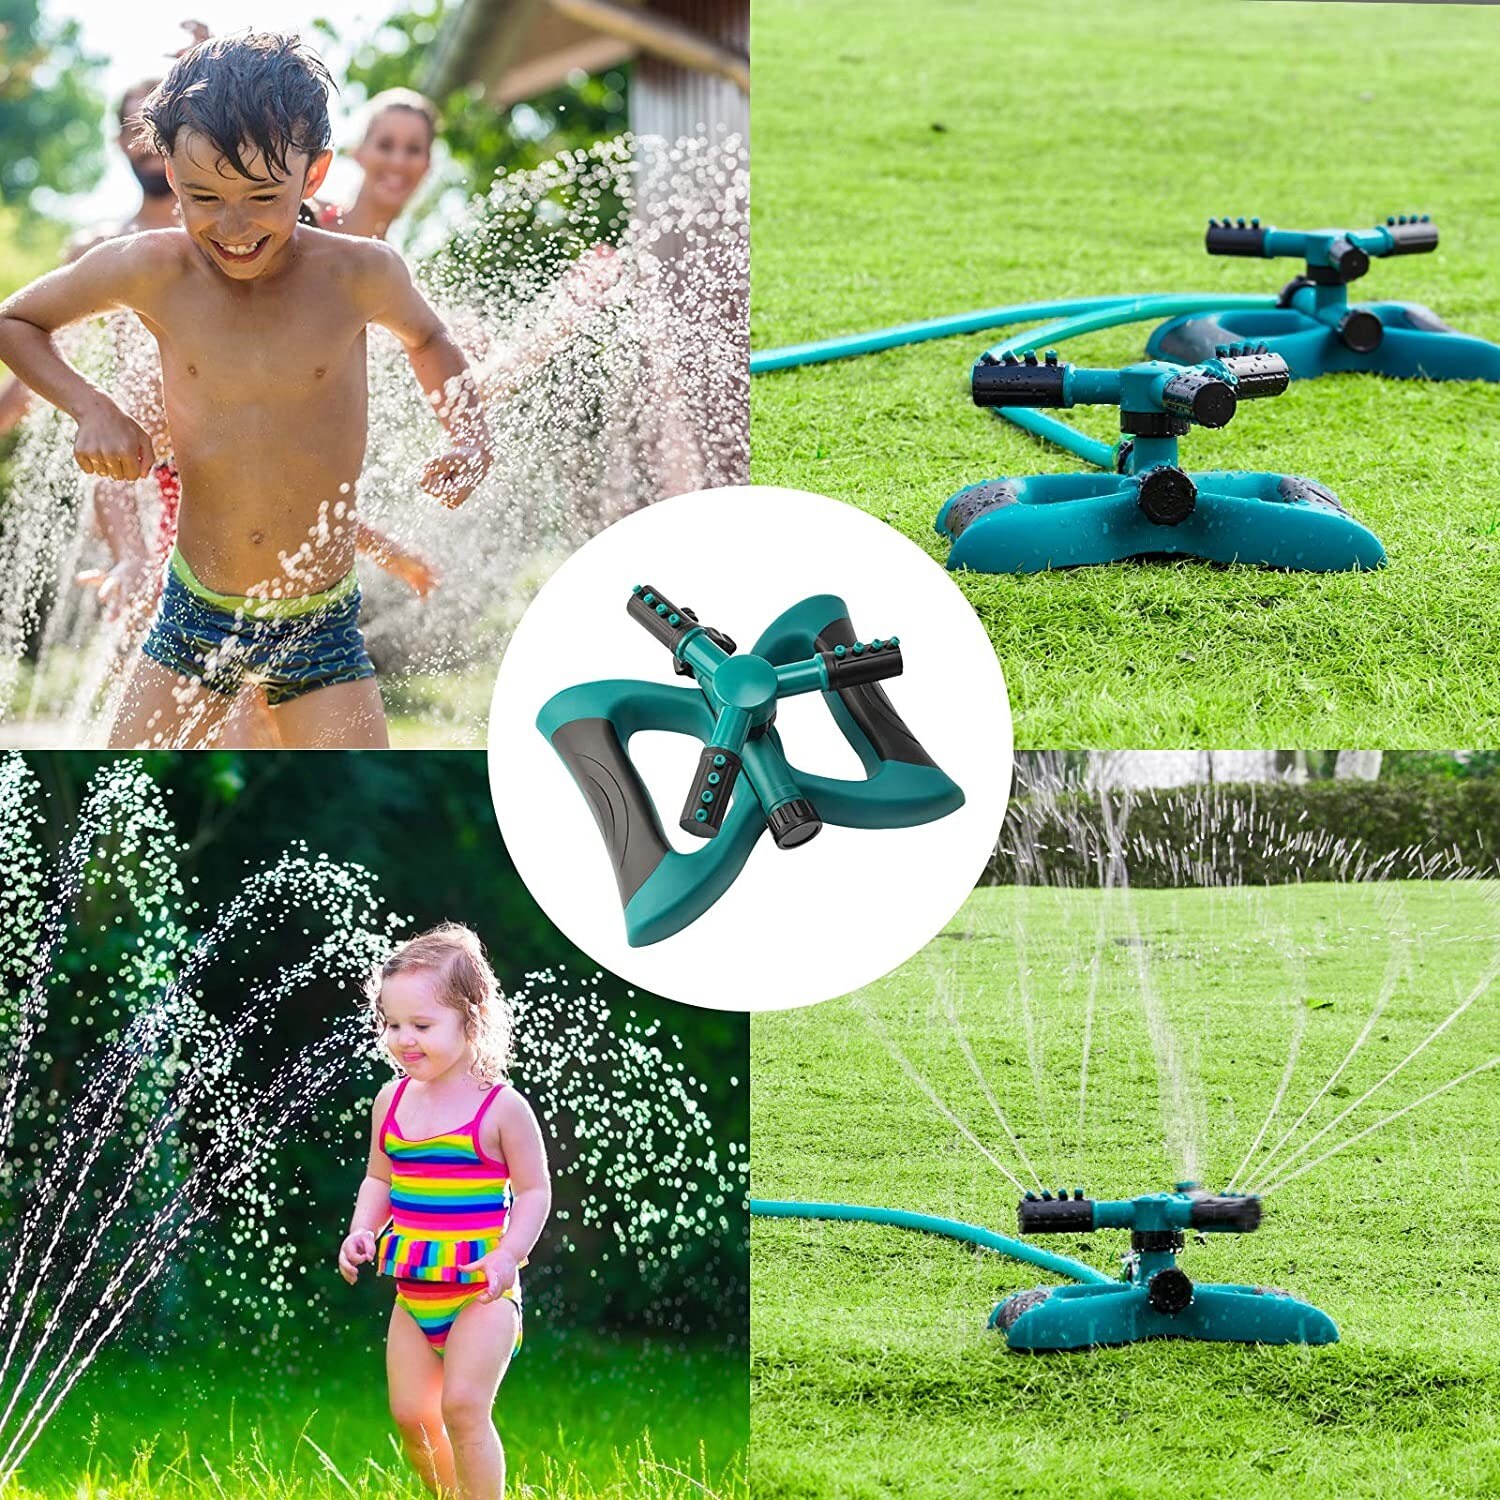 omaticx 360 Rotating Adjustable Garden Water Sprinklers Lawn Irrigationx System Covering Large Area with Leak Durable 3  Green - 4